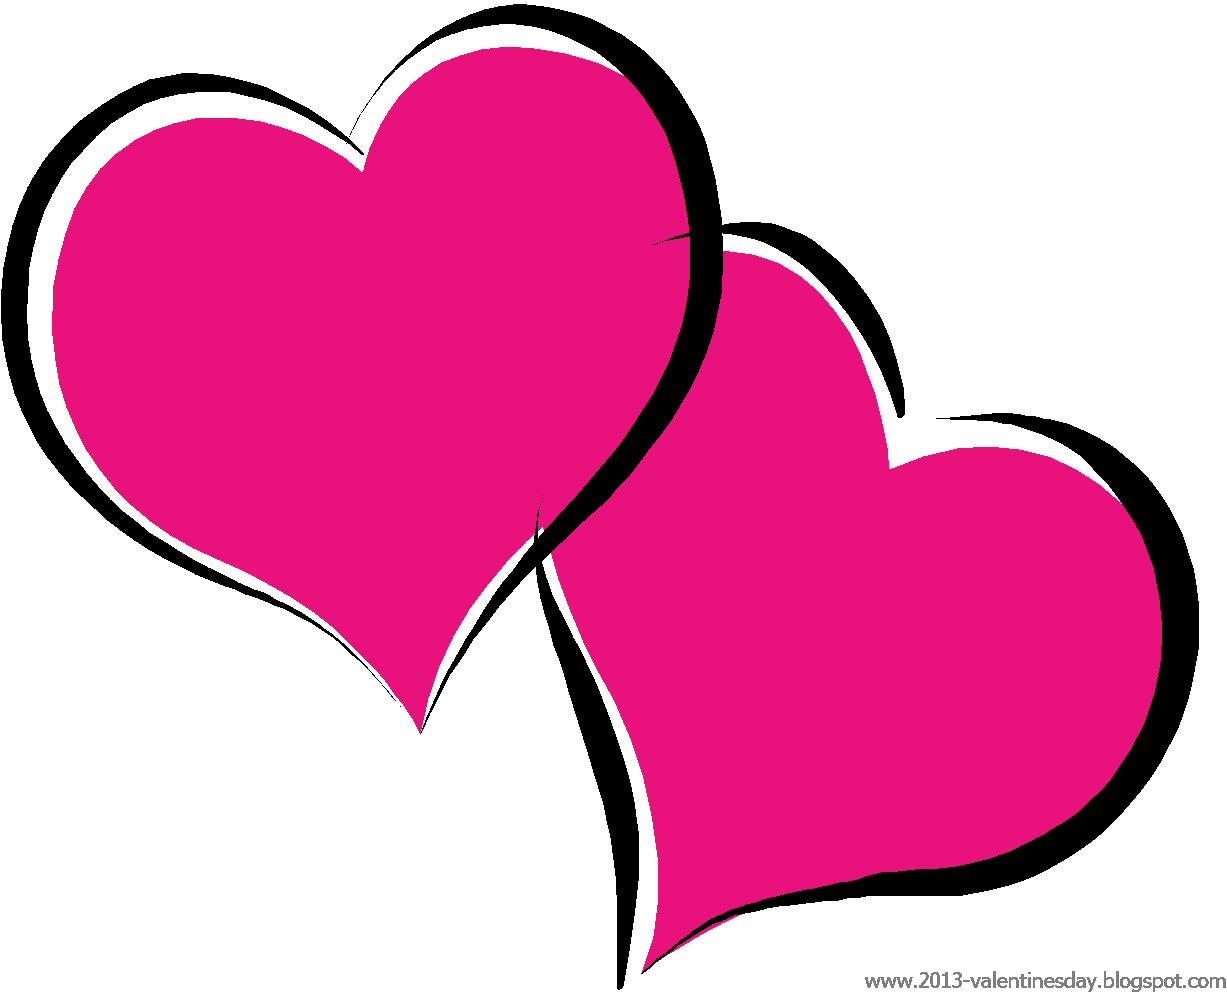 Valentines day Clip Art Collection 2013 | Online Quotes Gallery